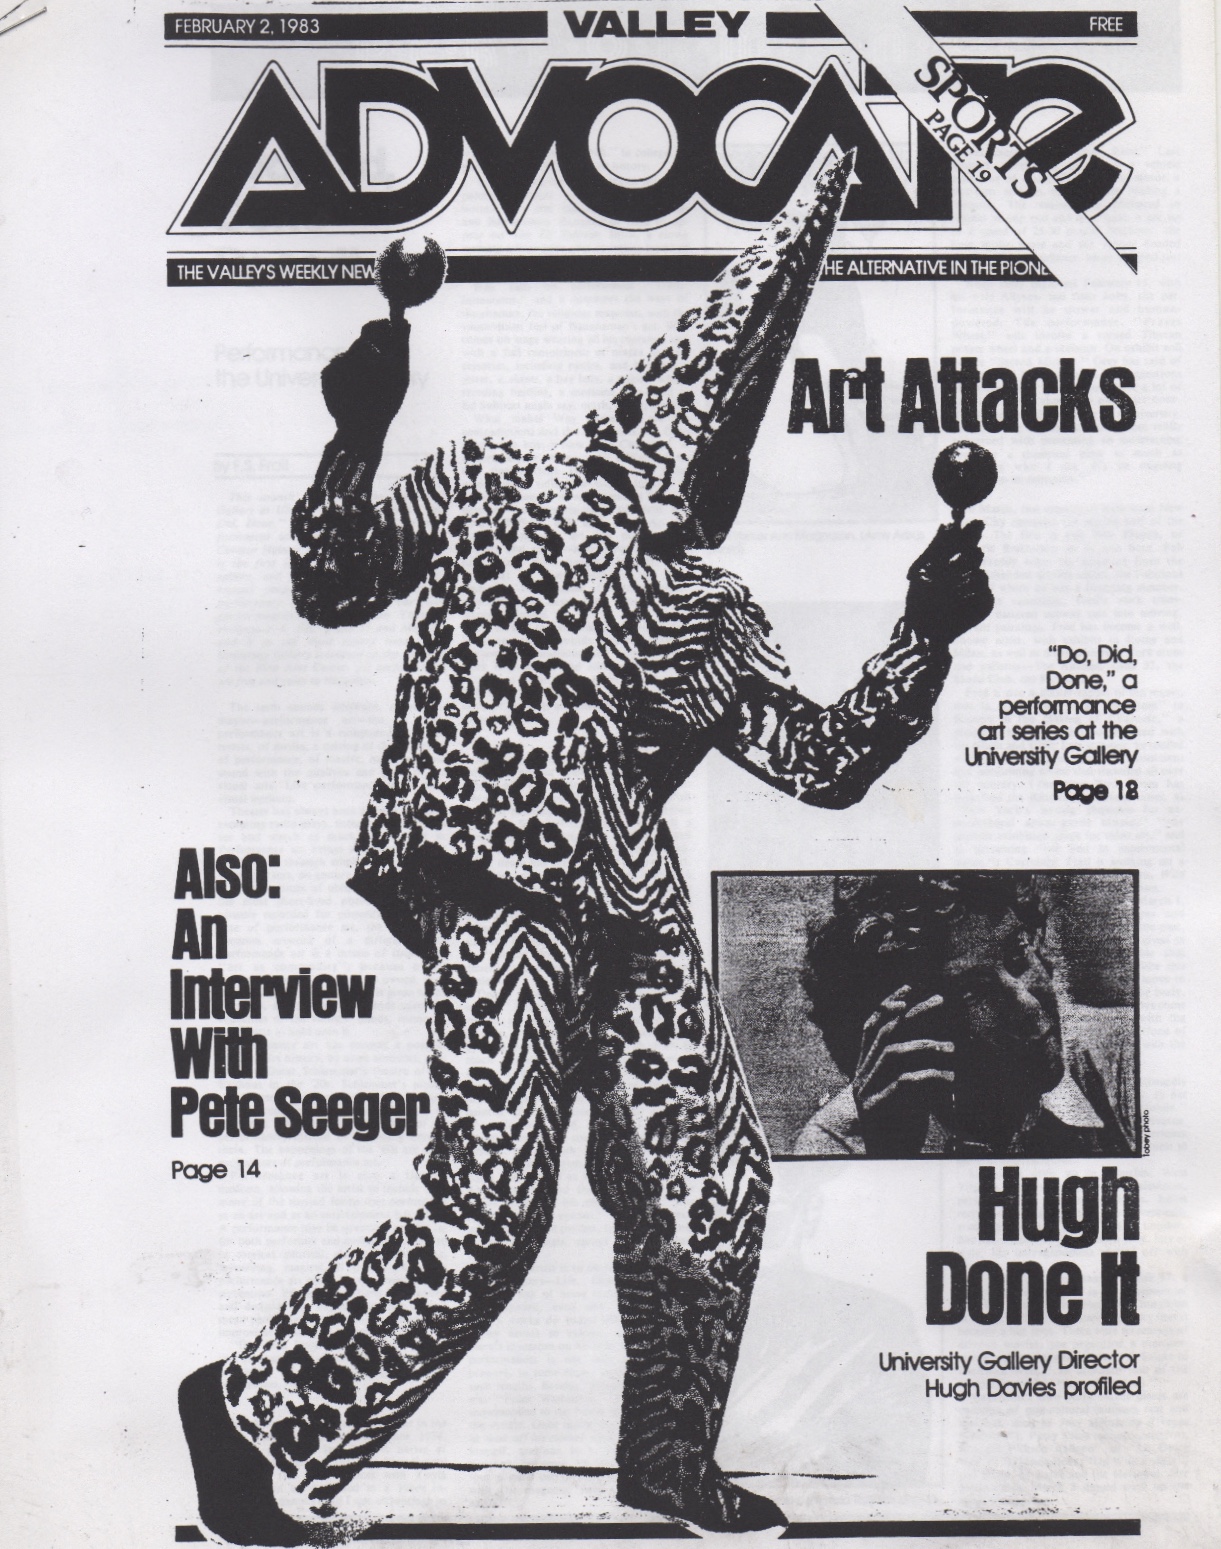 Do, Did, Done, Does It, F.S. Frail, Village Advocate, 1983